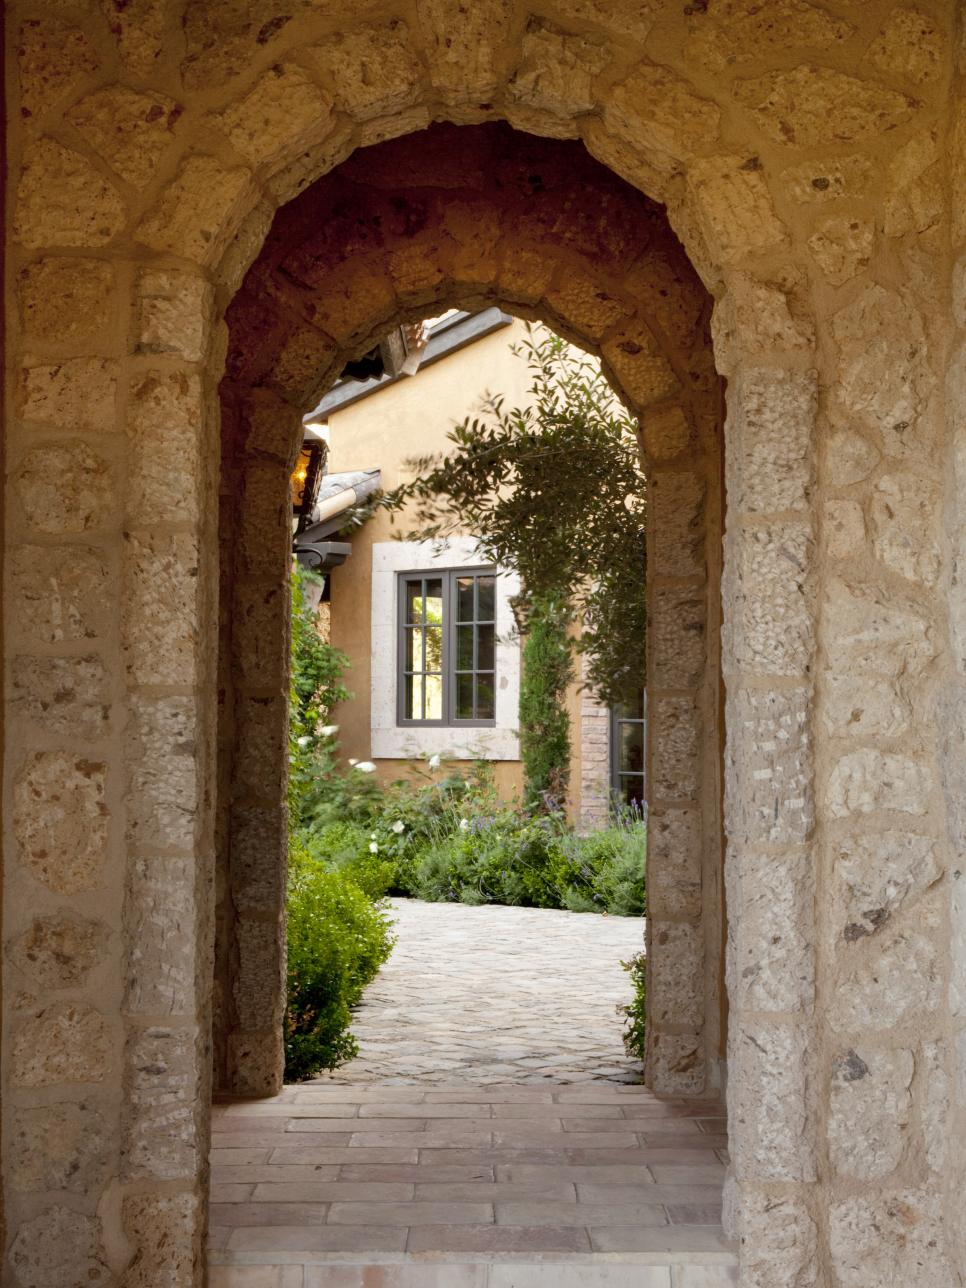 Stone Arch Detail in Entrance into Courtyard